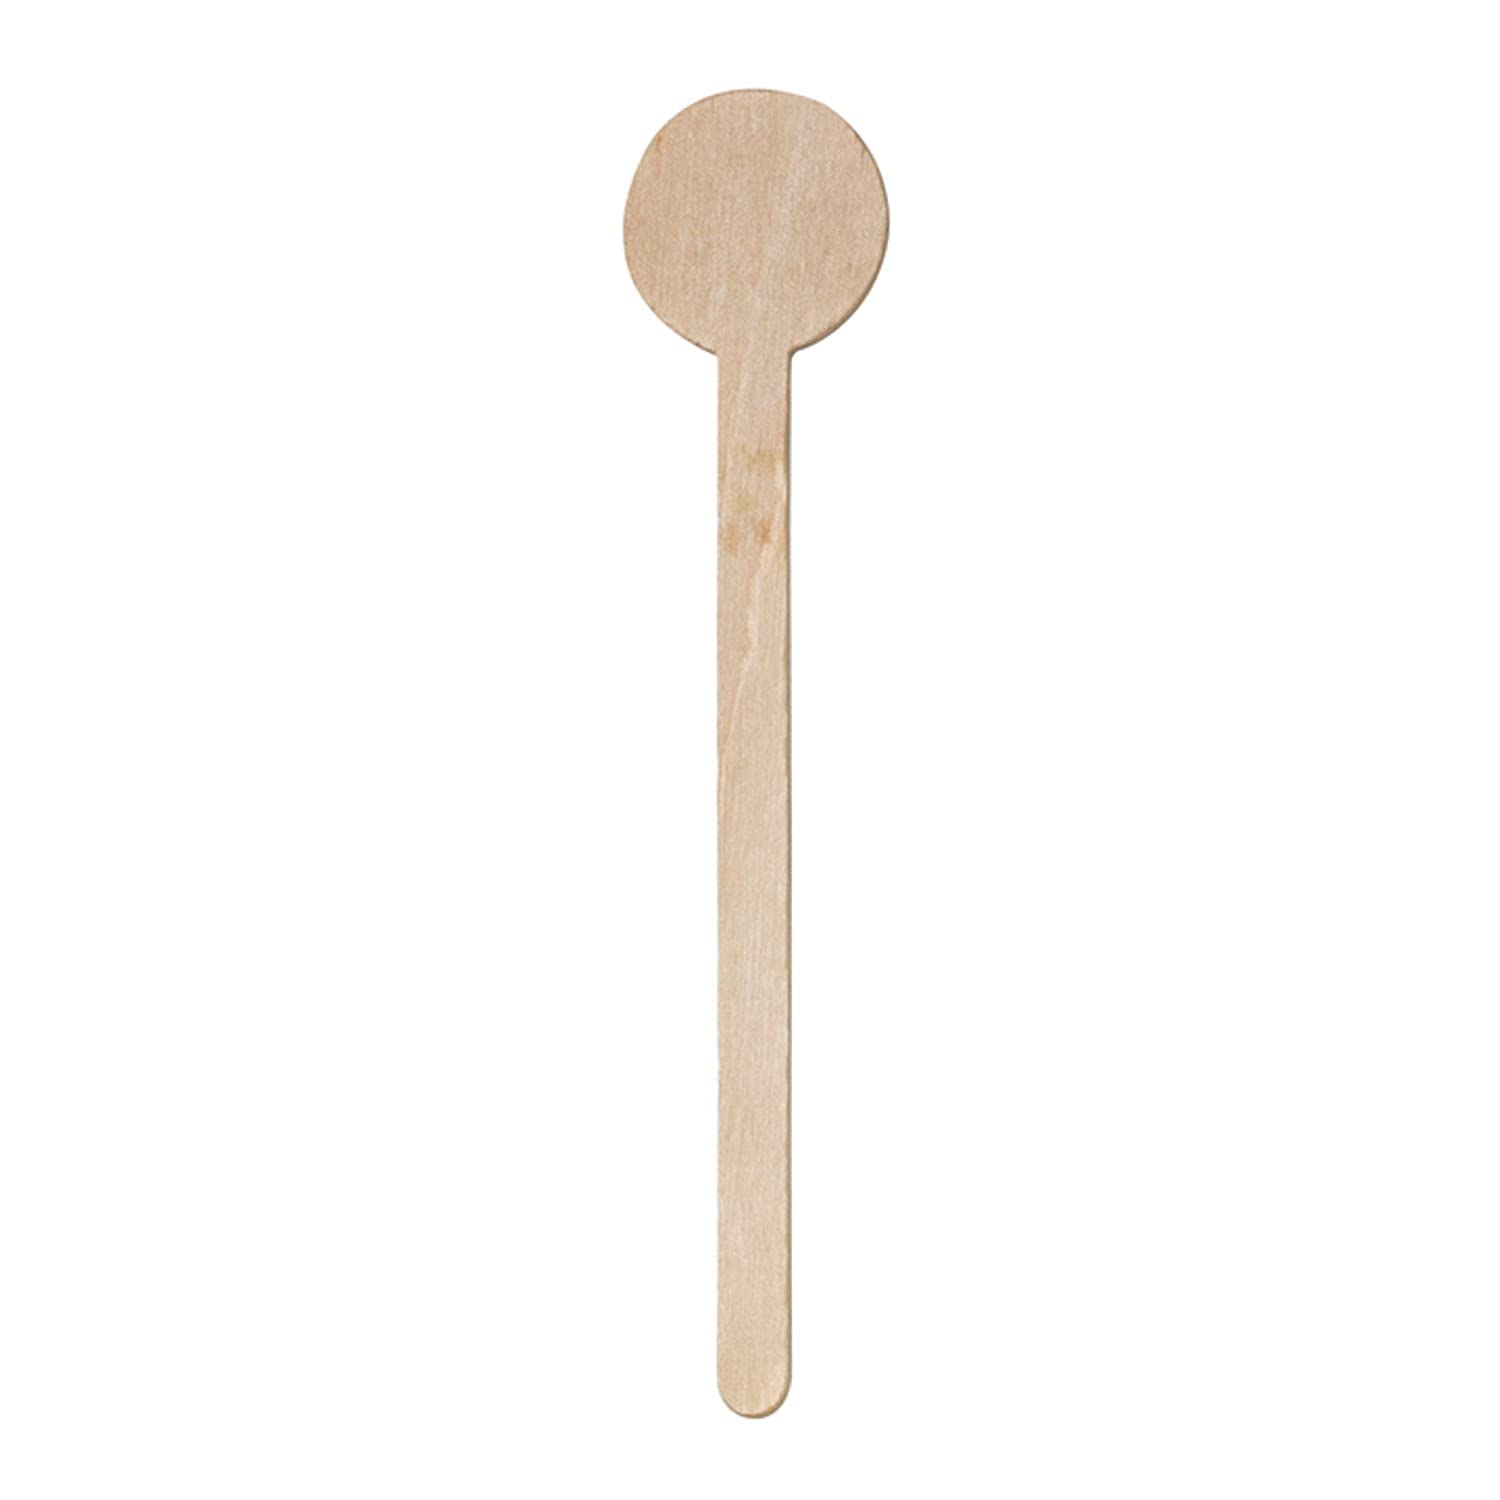 NJ Wooden Coffee/Cocktail Drink Stirrers, Disposable Biodegradable Milk Drink Stirrers for Beverages, Wooden Cutlery, Wooden eco-Friendly Stirrer, 6 Inches